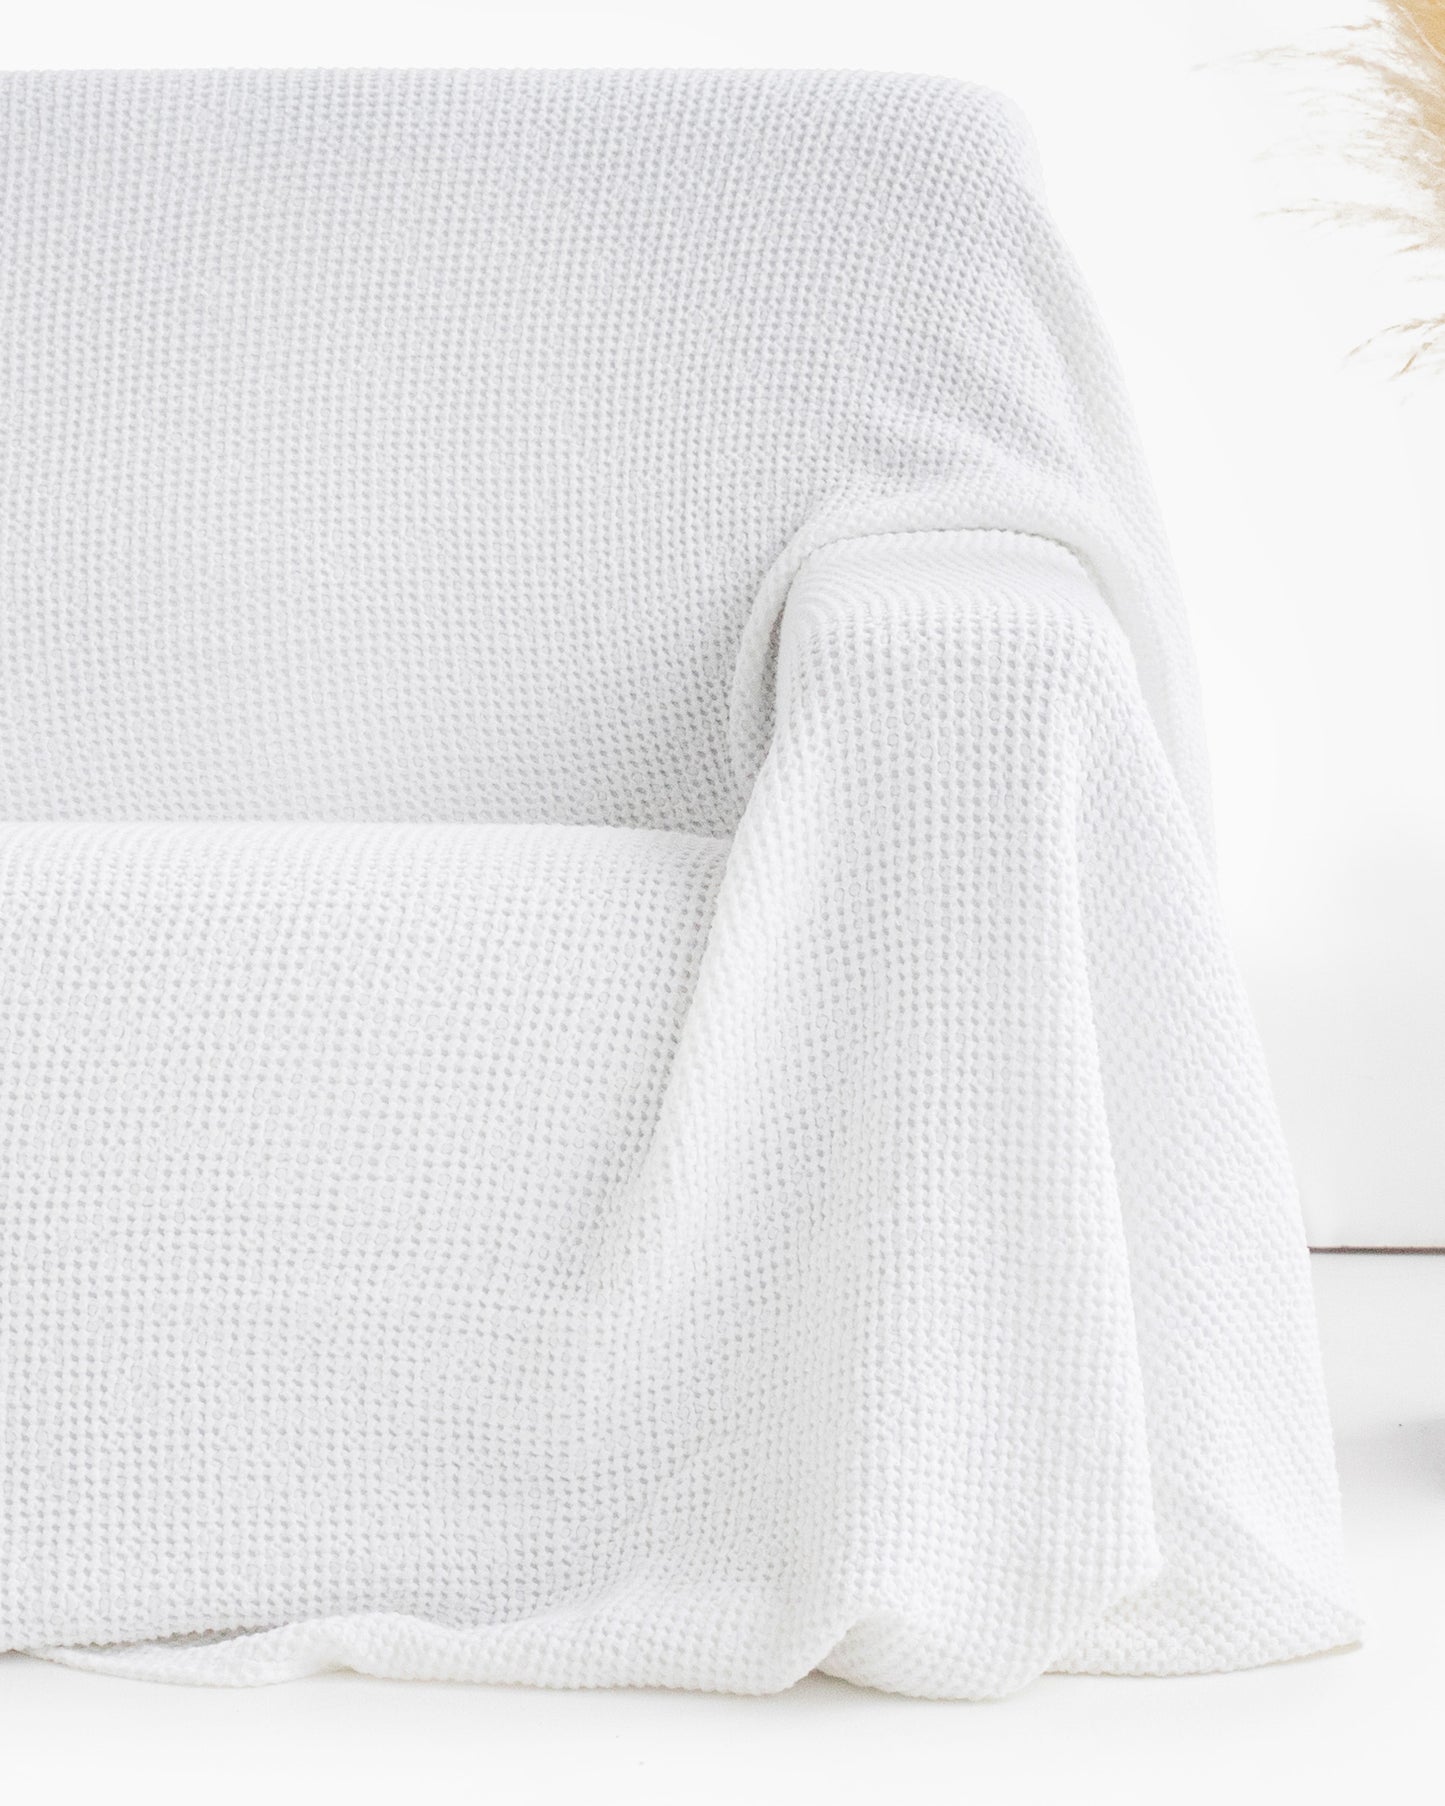 Waffle linen couch cover in White - MagicLinen